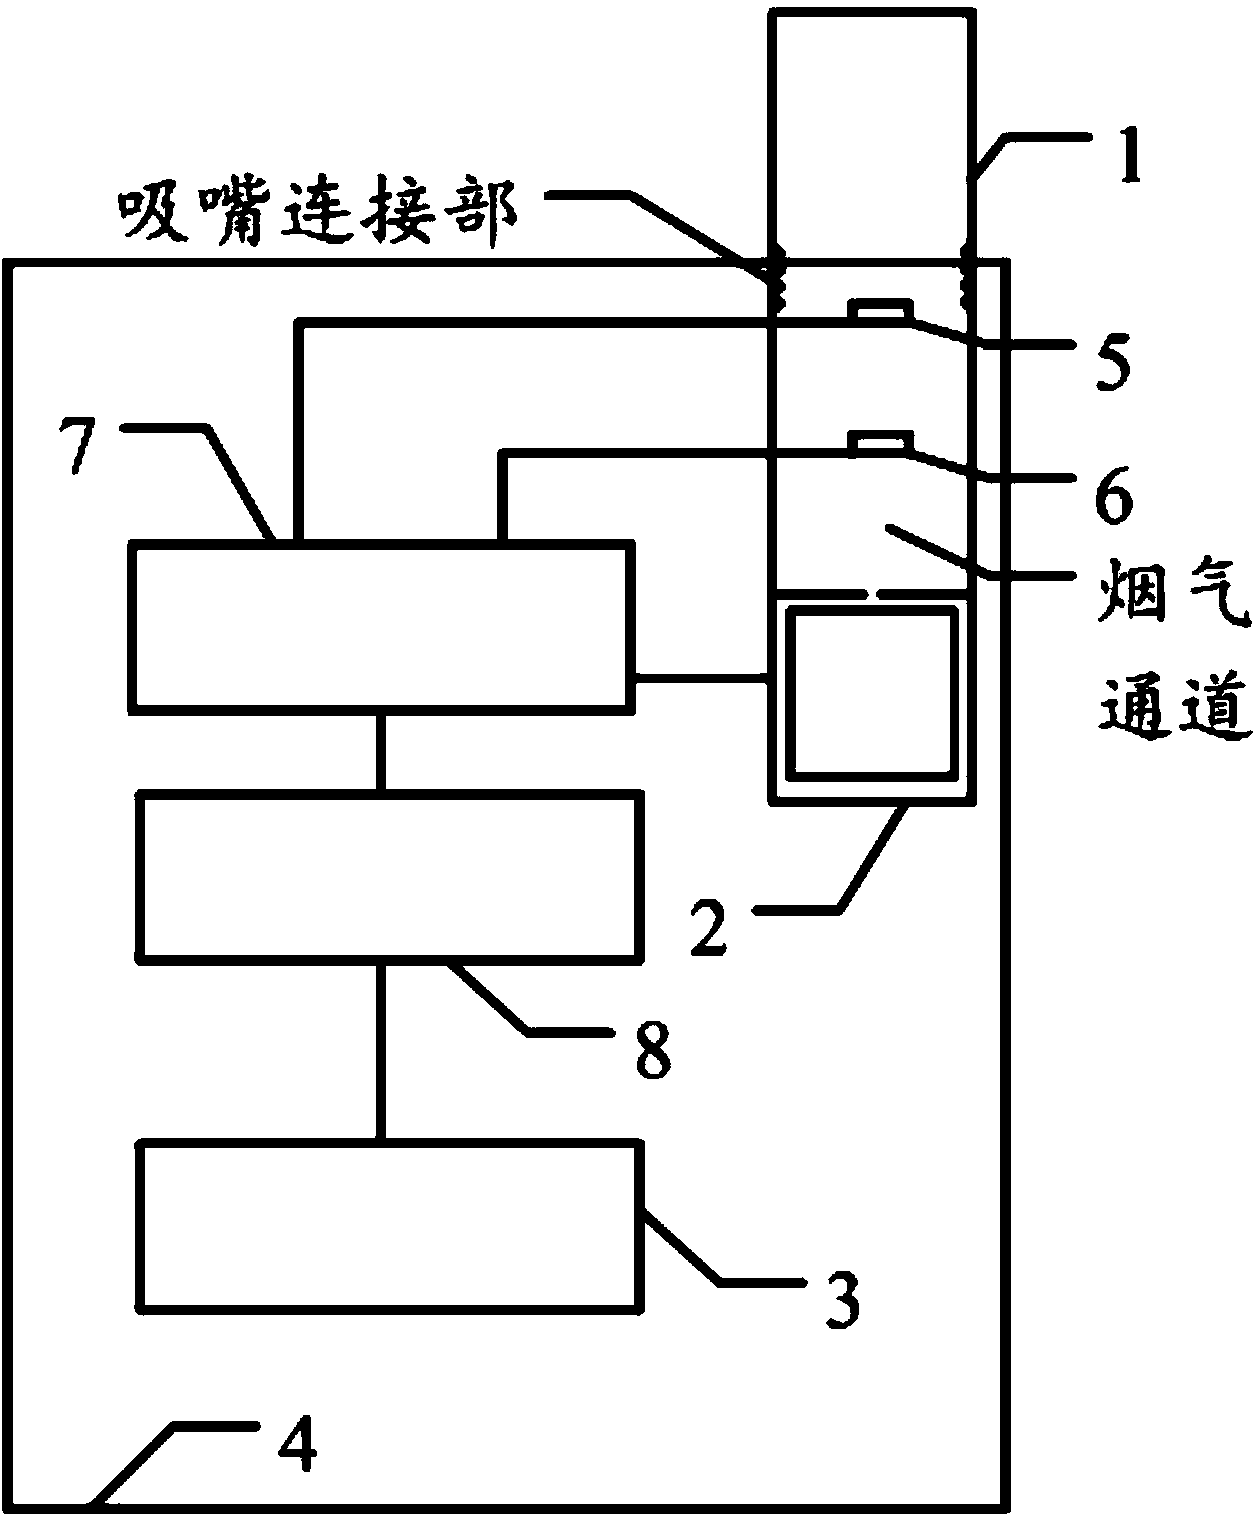 Tobacco heating device with smoking amount prompting function